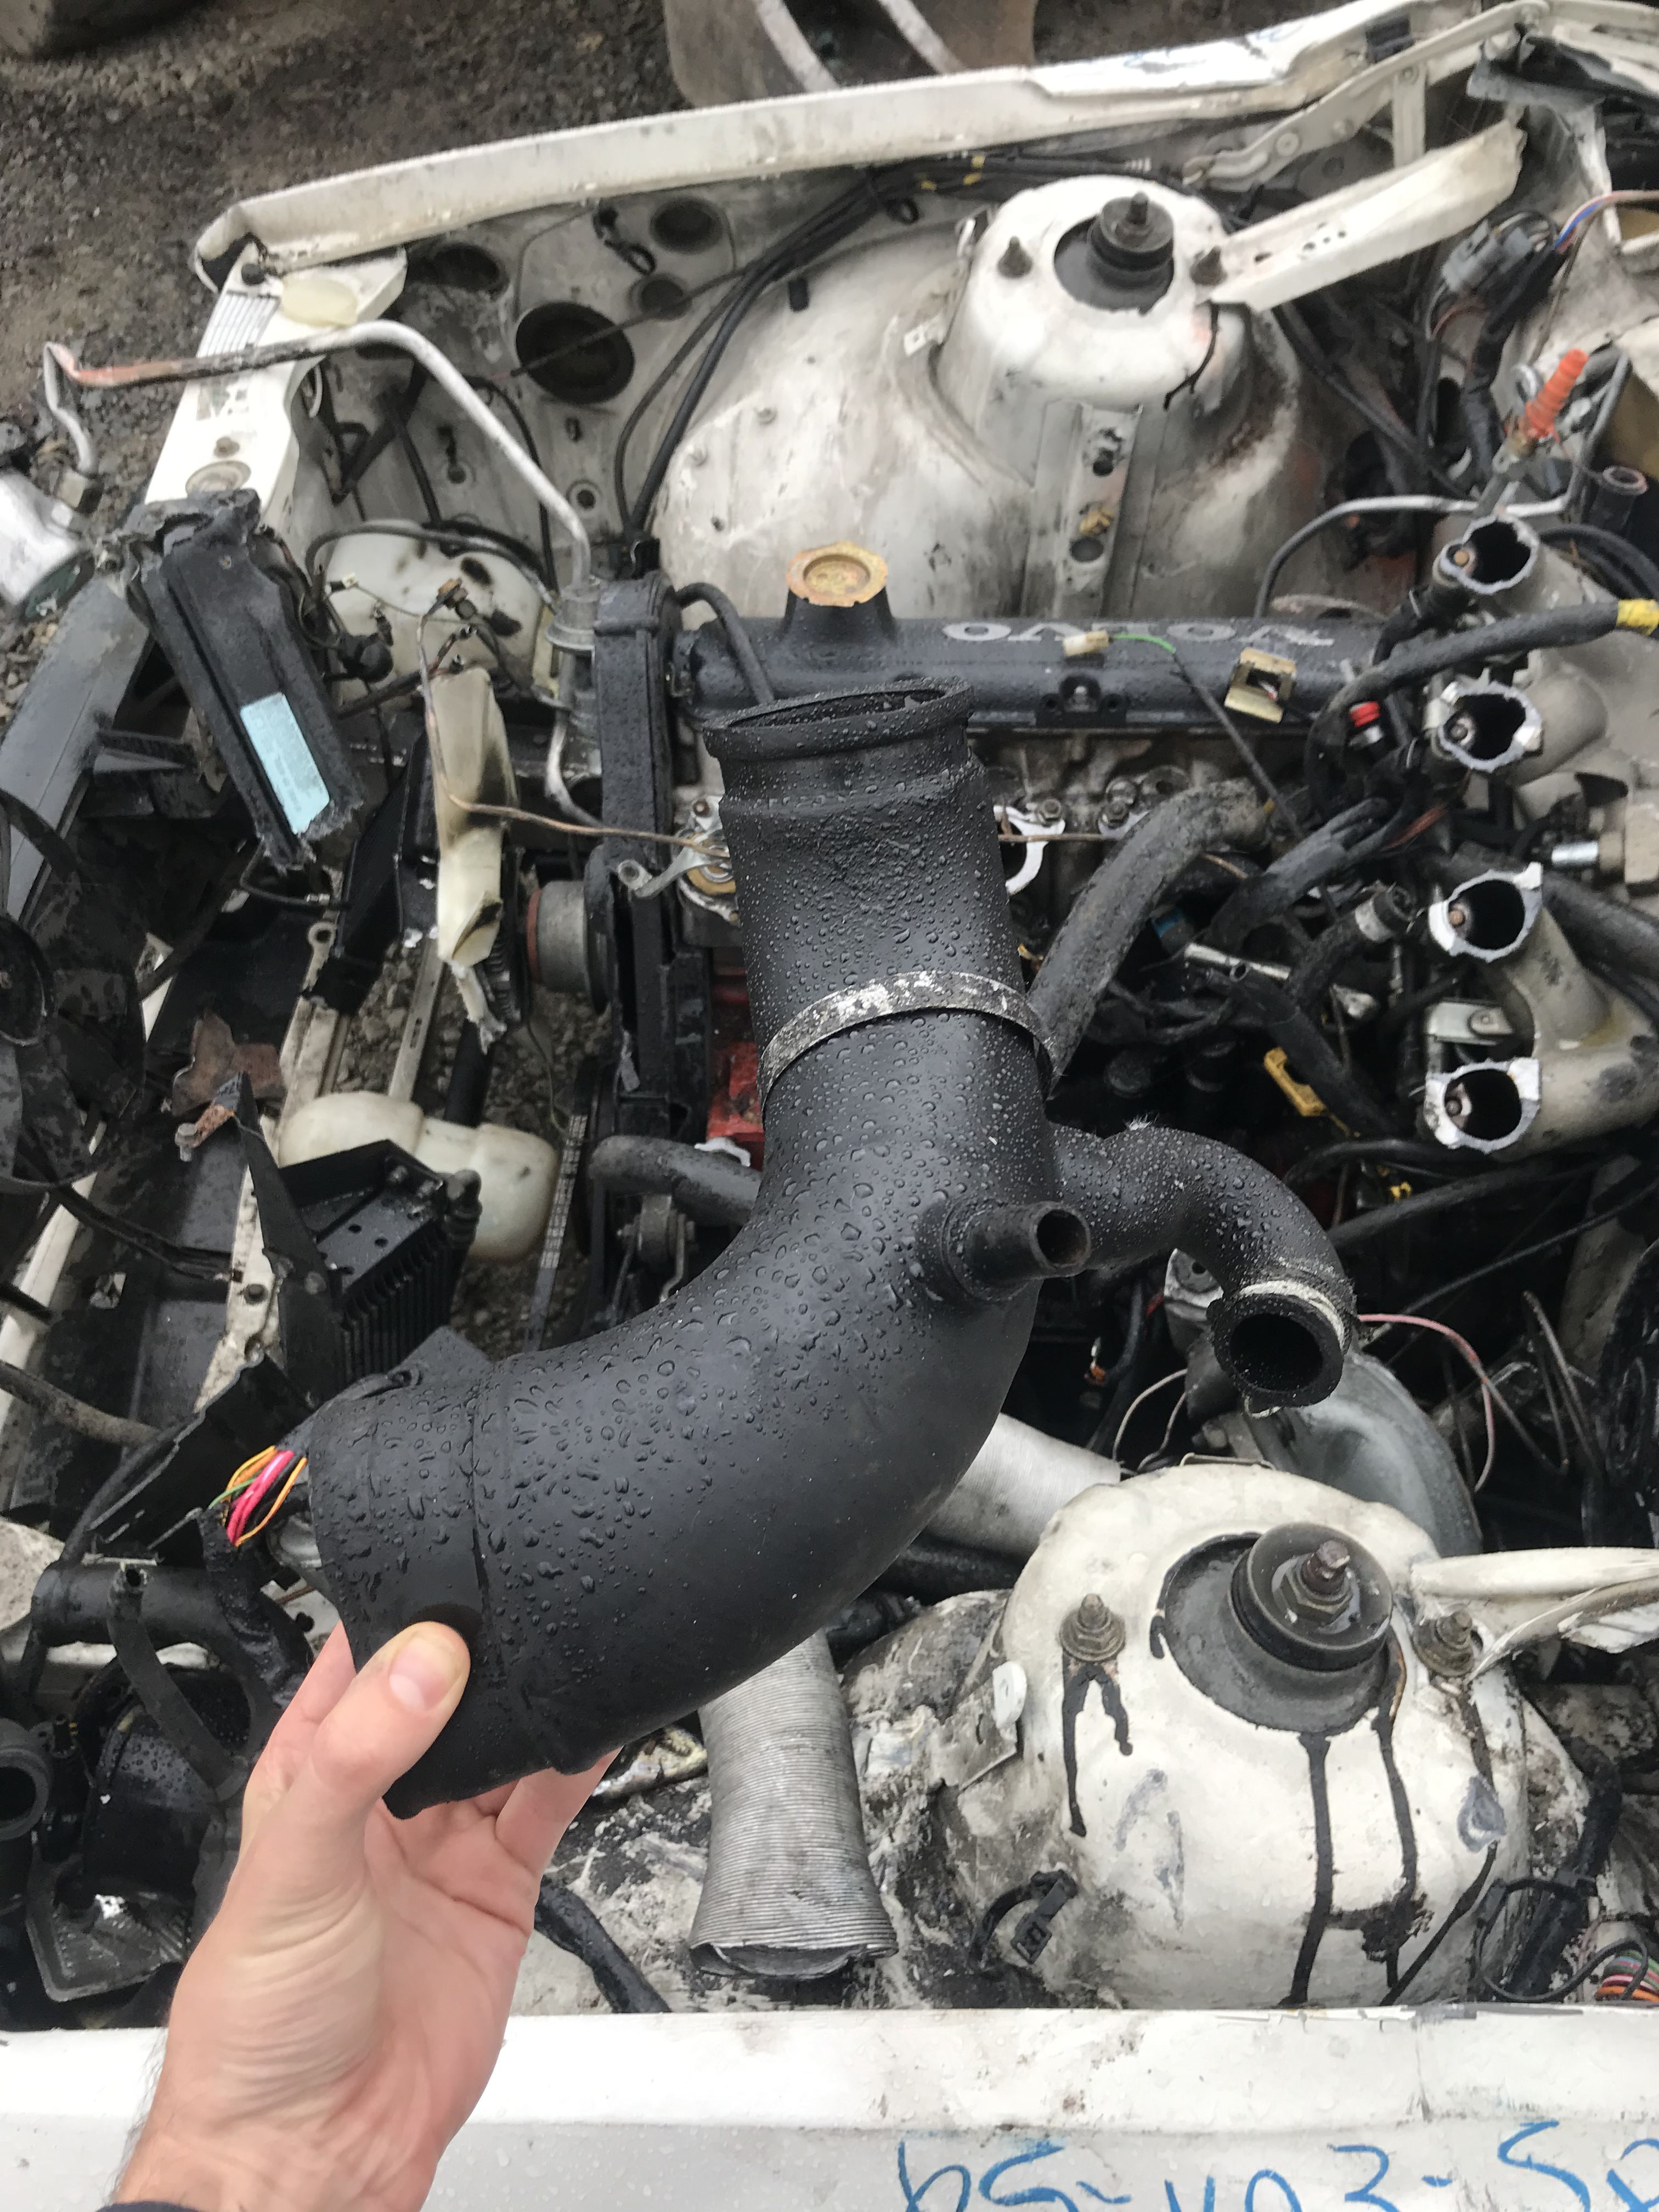 Hand holding black rubber piping in front of a car's engine bay